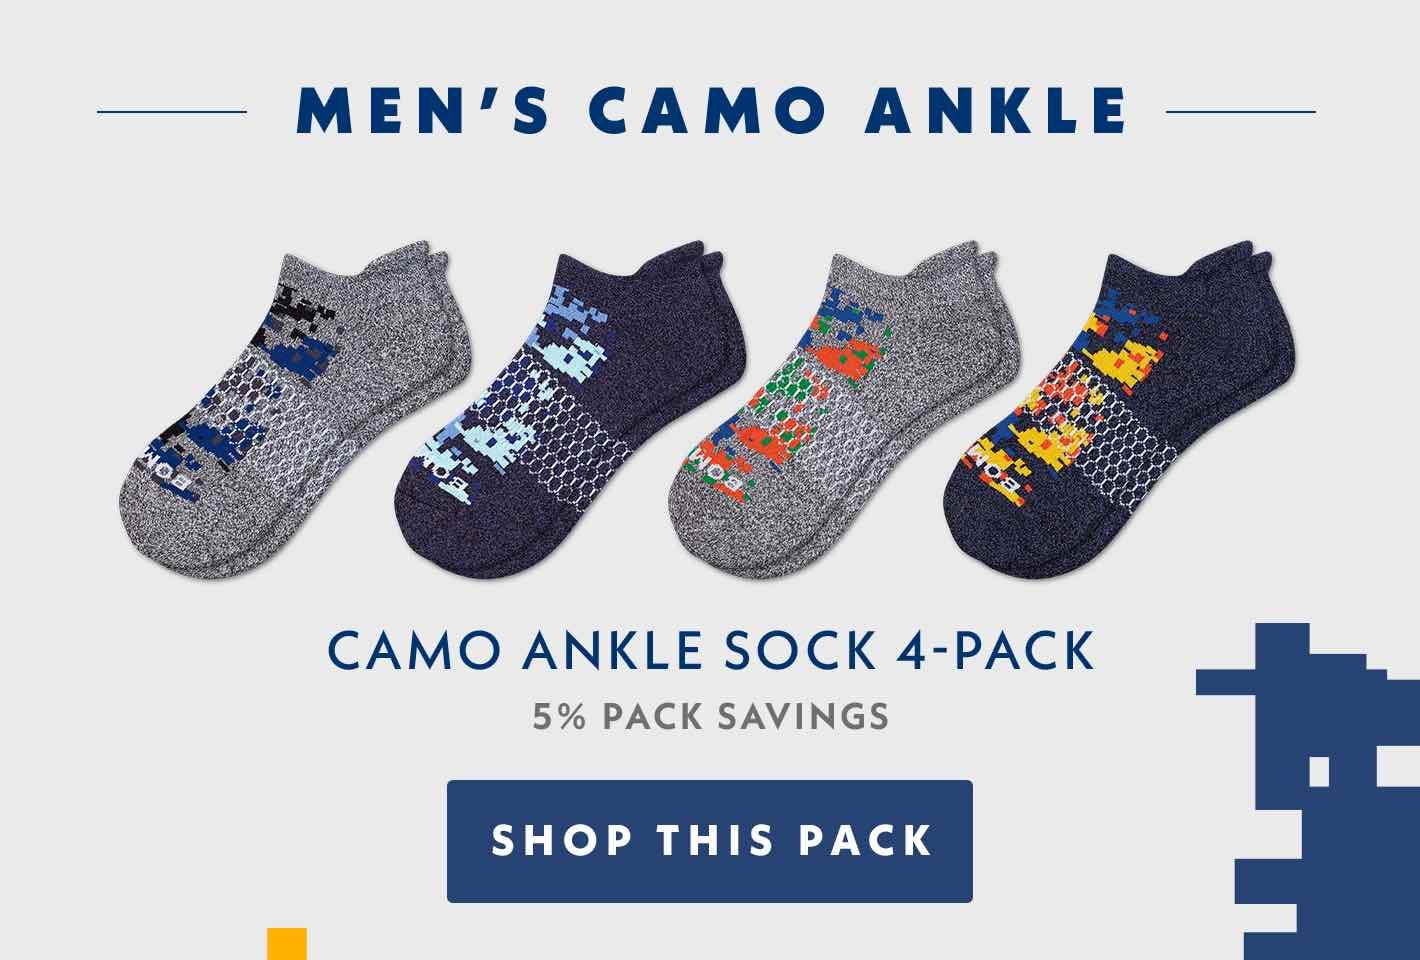 Men's Camo Ankle Sock 4-Pack. Shop This Pack.